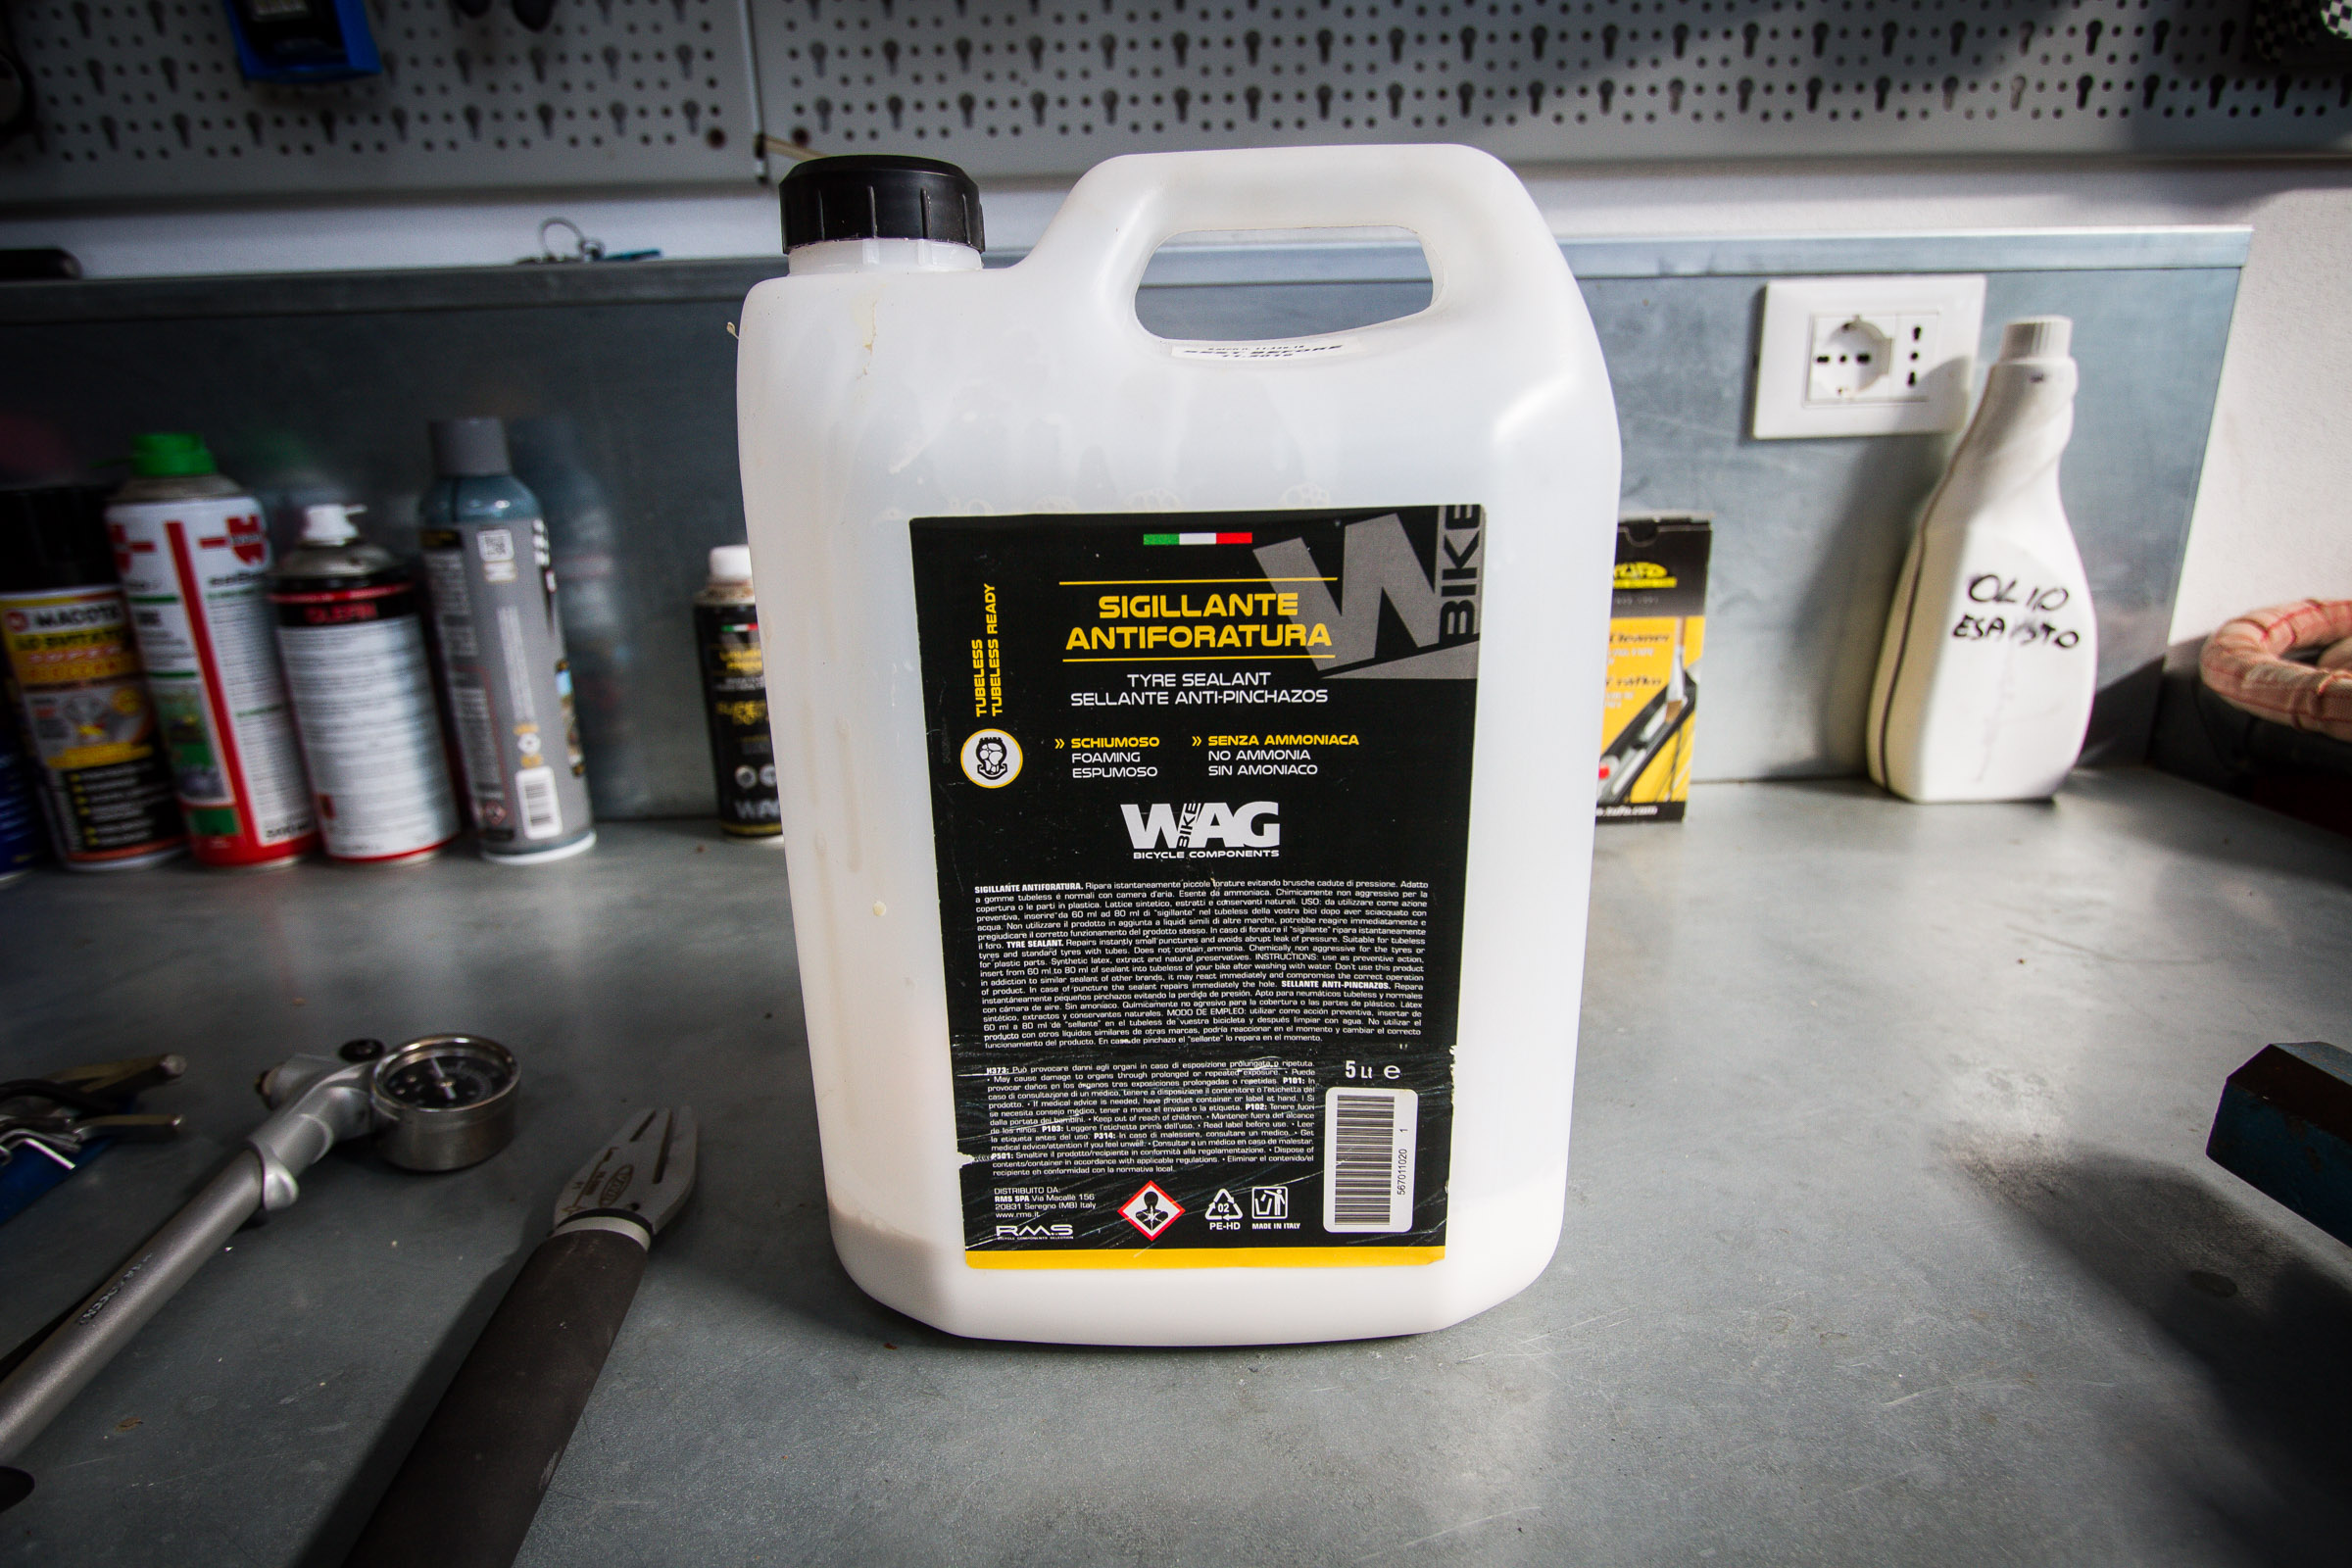 Tyre sealant and lots of it is a very valuable item to own. At about 80 euros for a big pot, it gives you ability to do keep all your tyres running properly and switch out without worrying about transferring liquid into the new tyre.